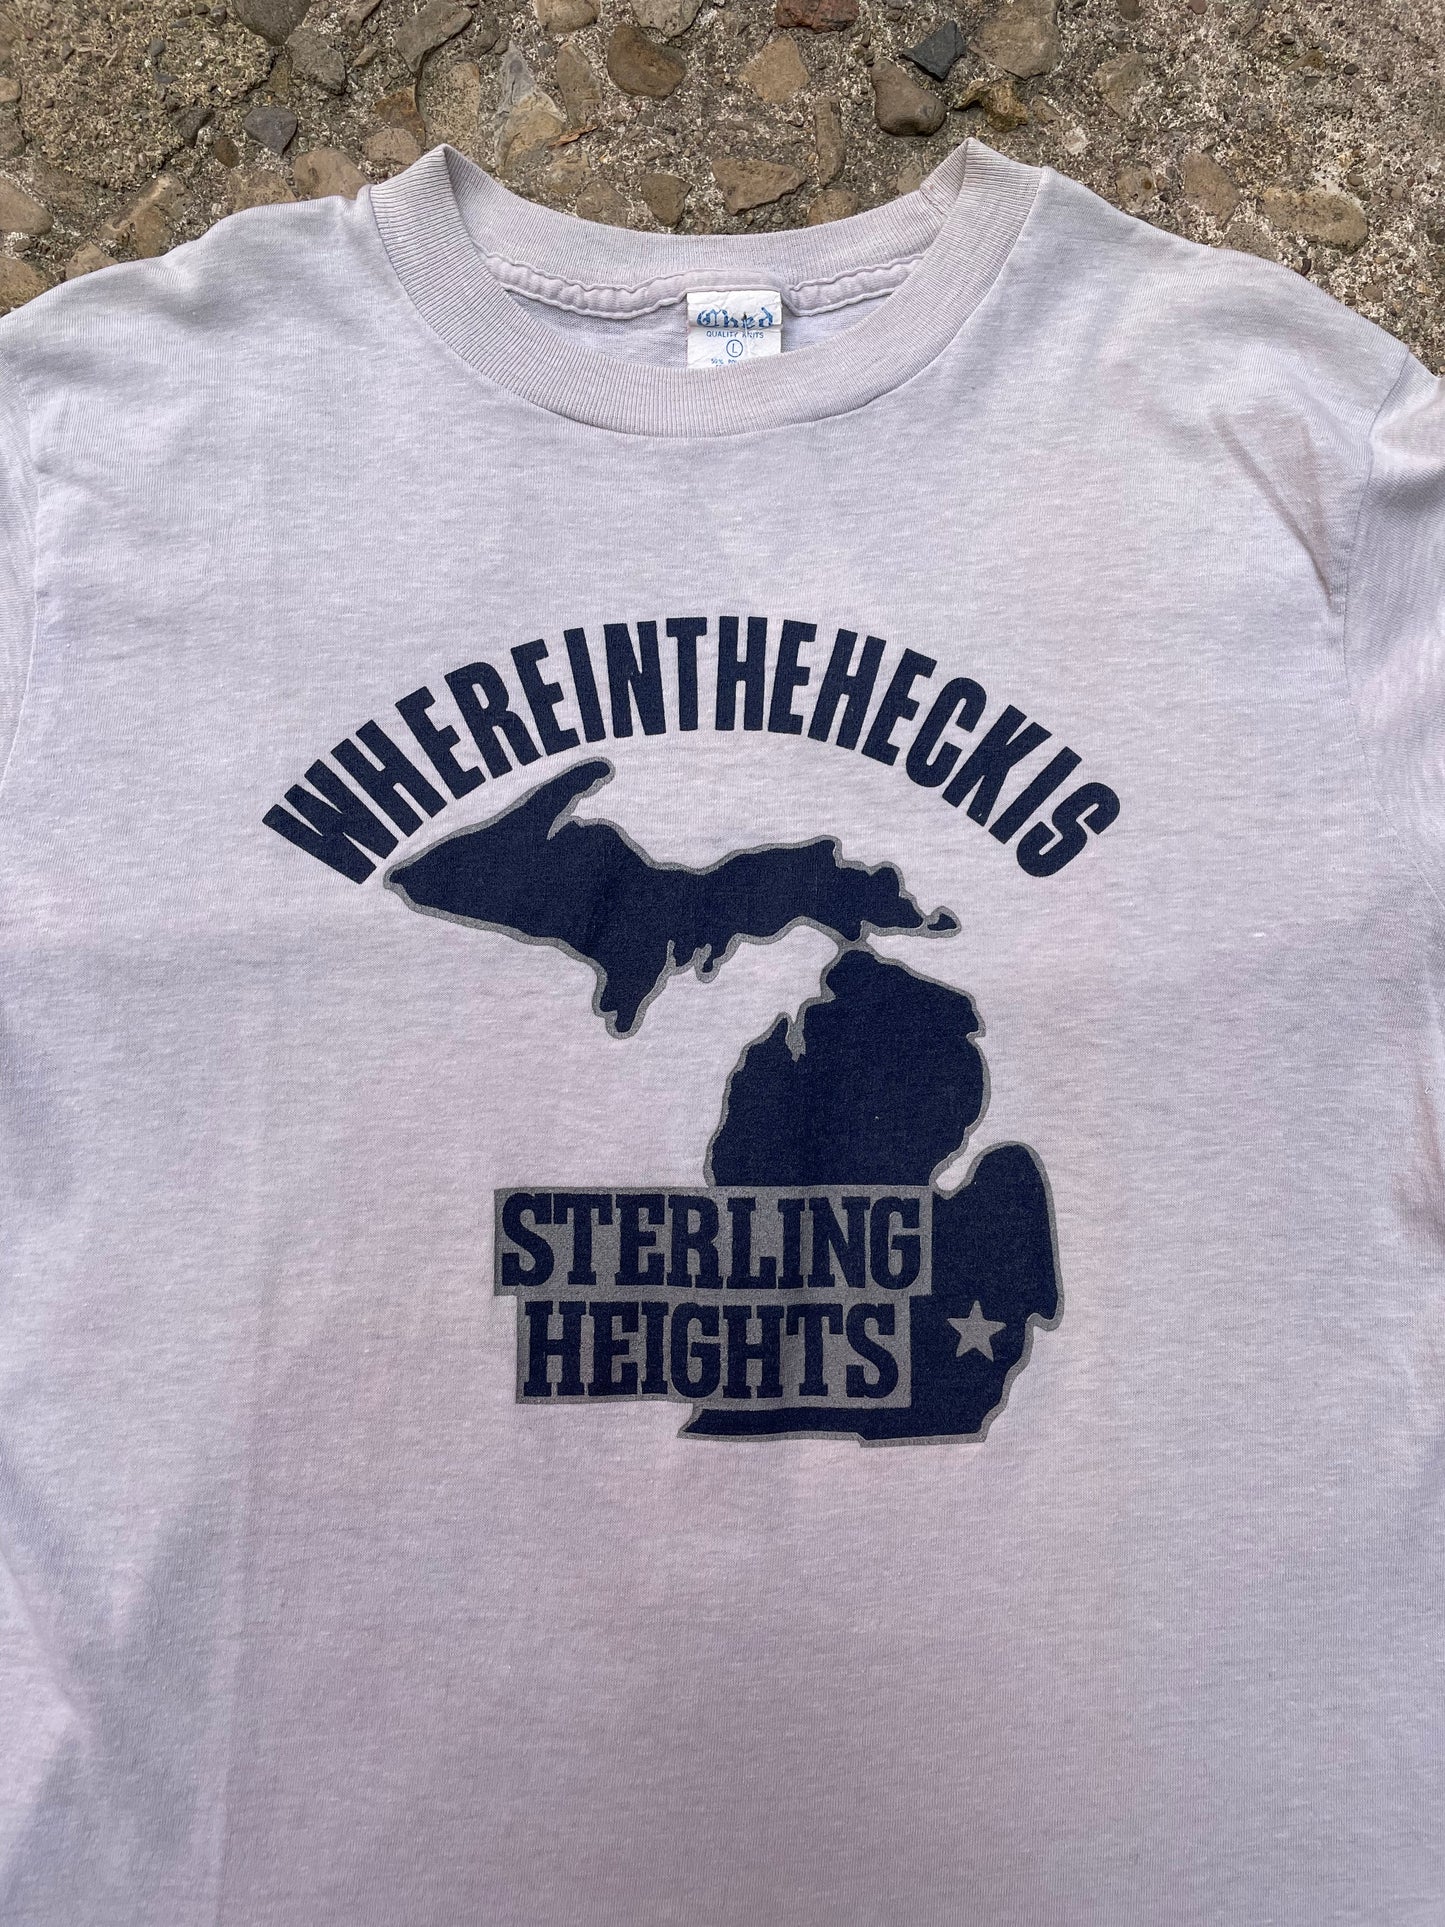 1970's/1980's 'Where in the Heck is Sterling Heights' T-Shirt - M